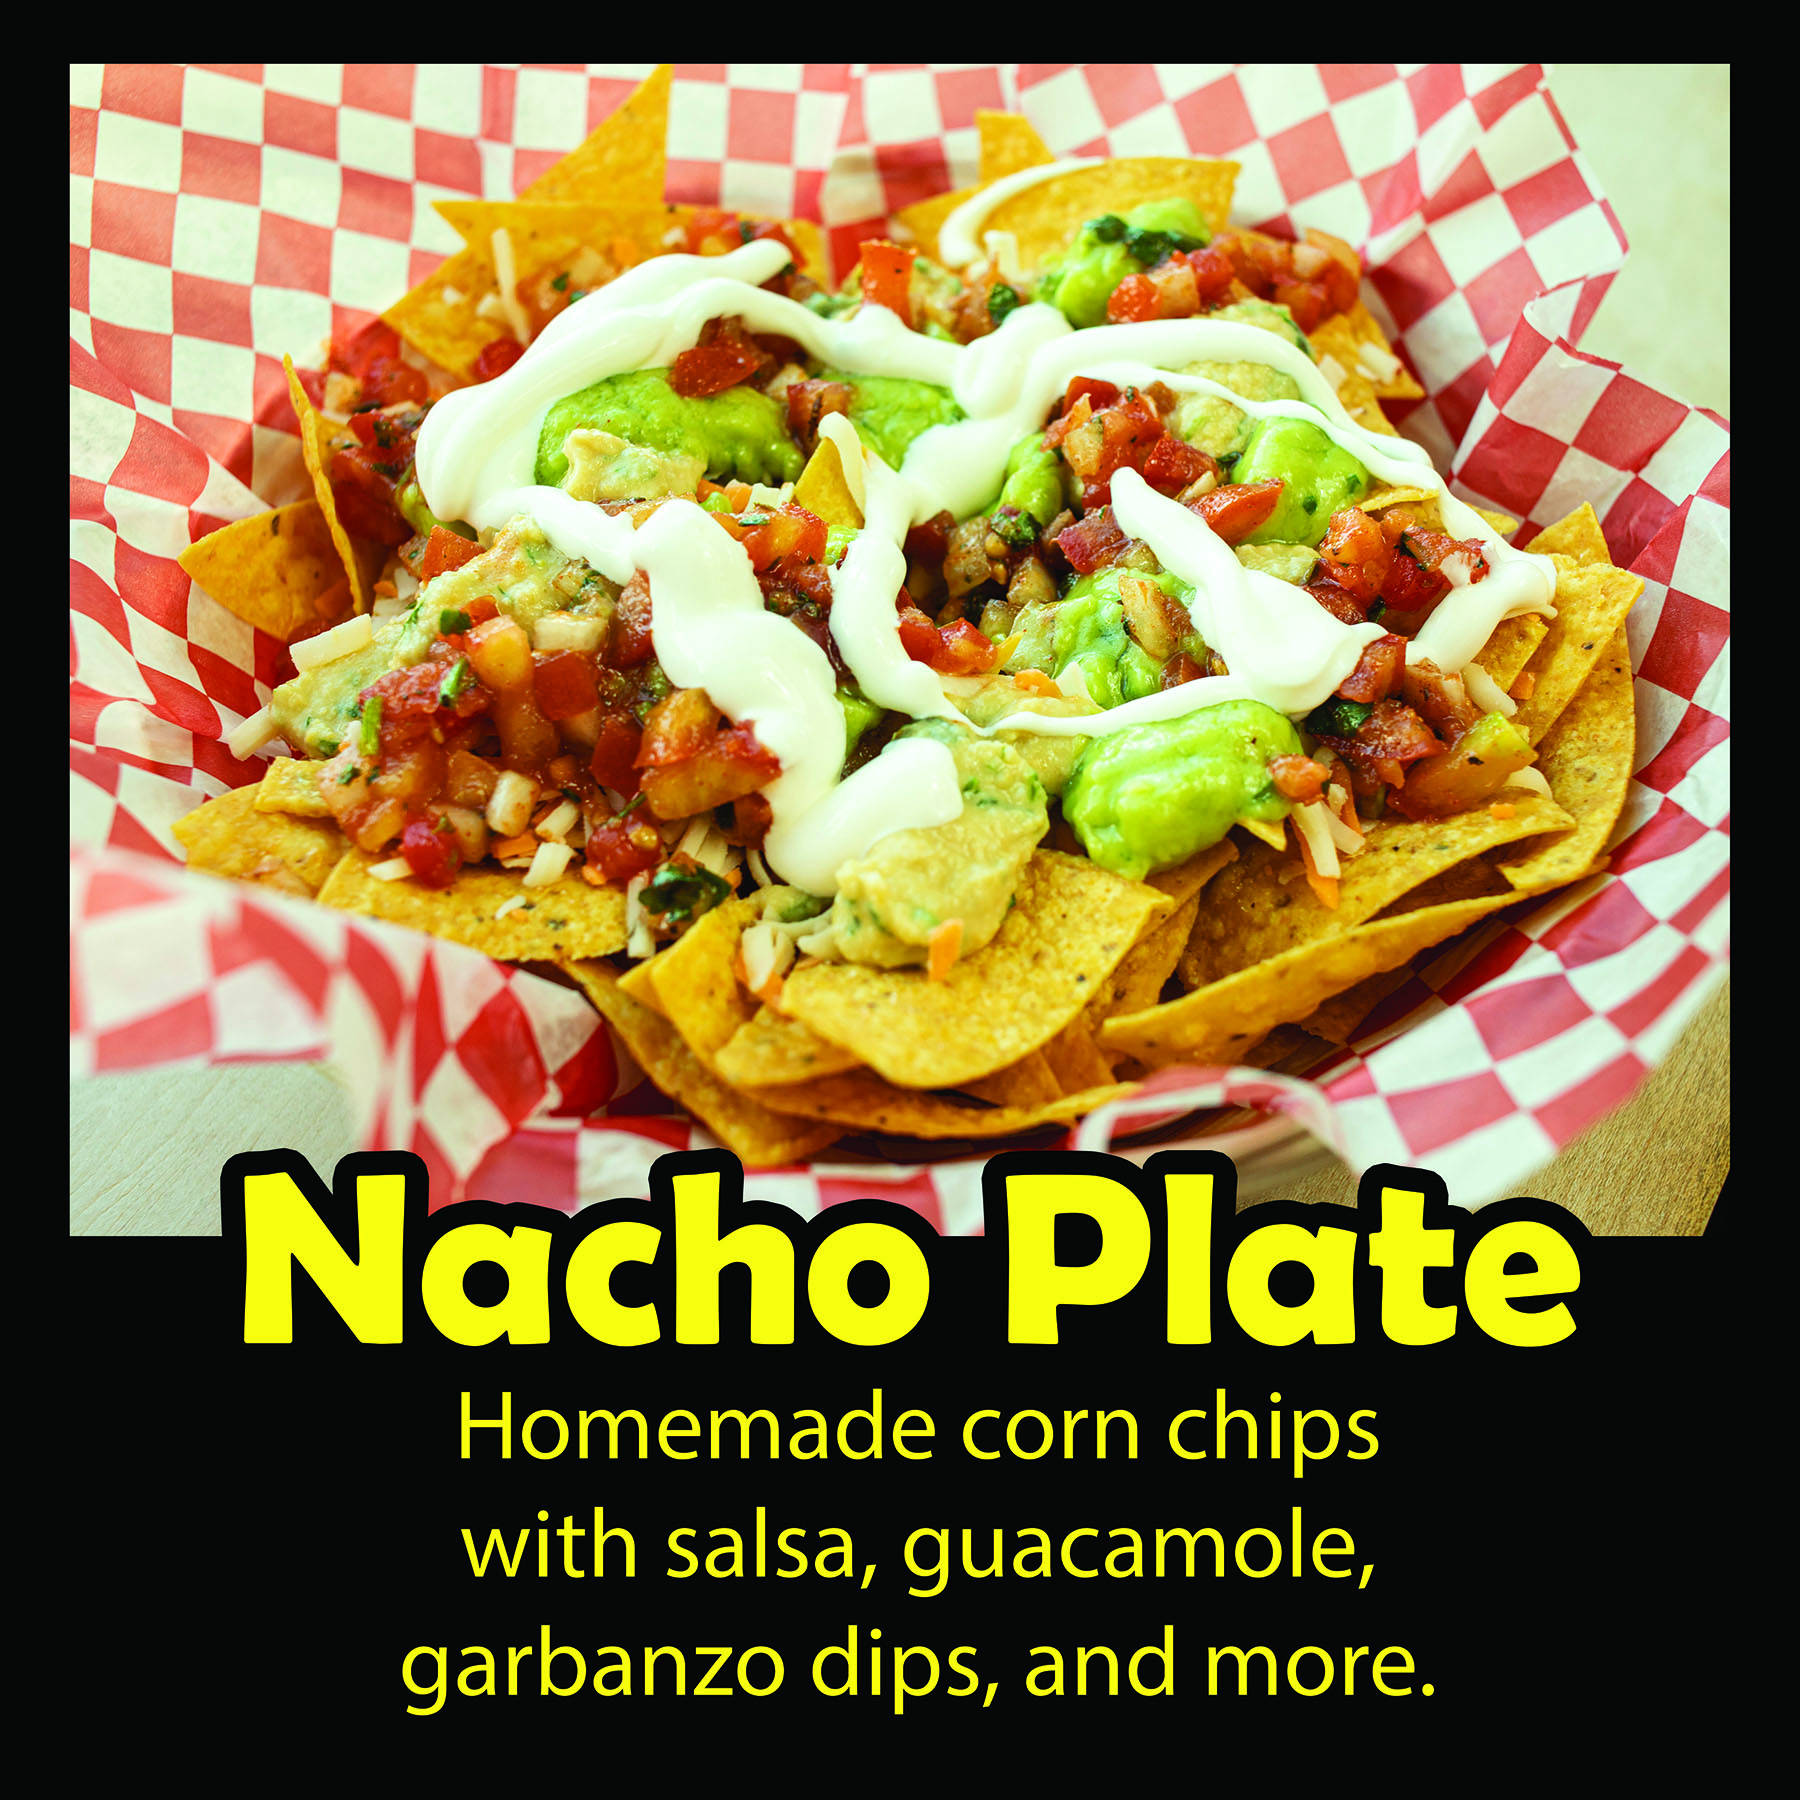 Nacho Plate: Homemade corn chips with salsa, guacamole, garbanzo dips and more.